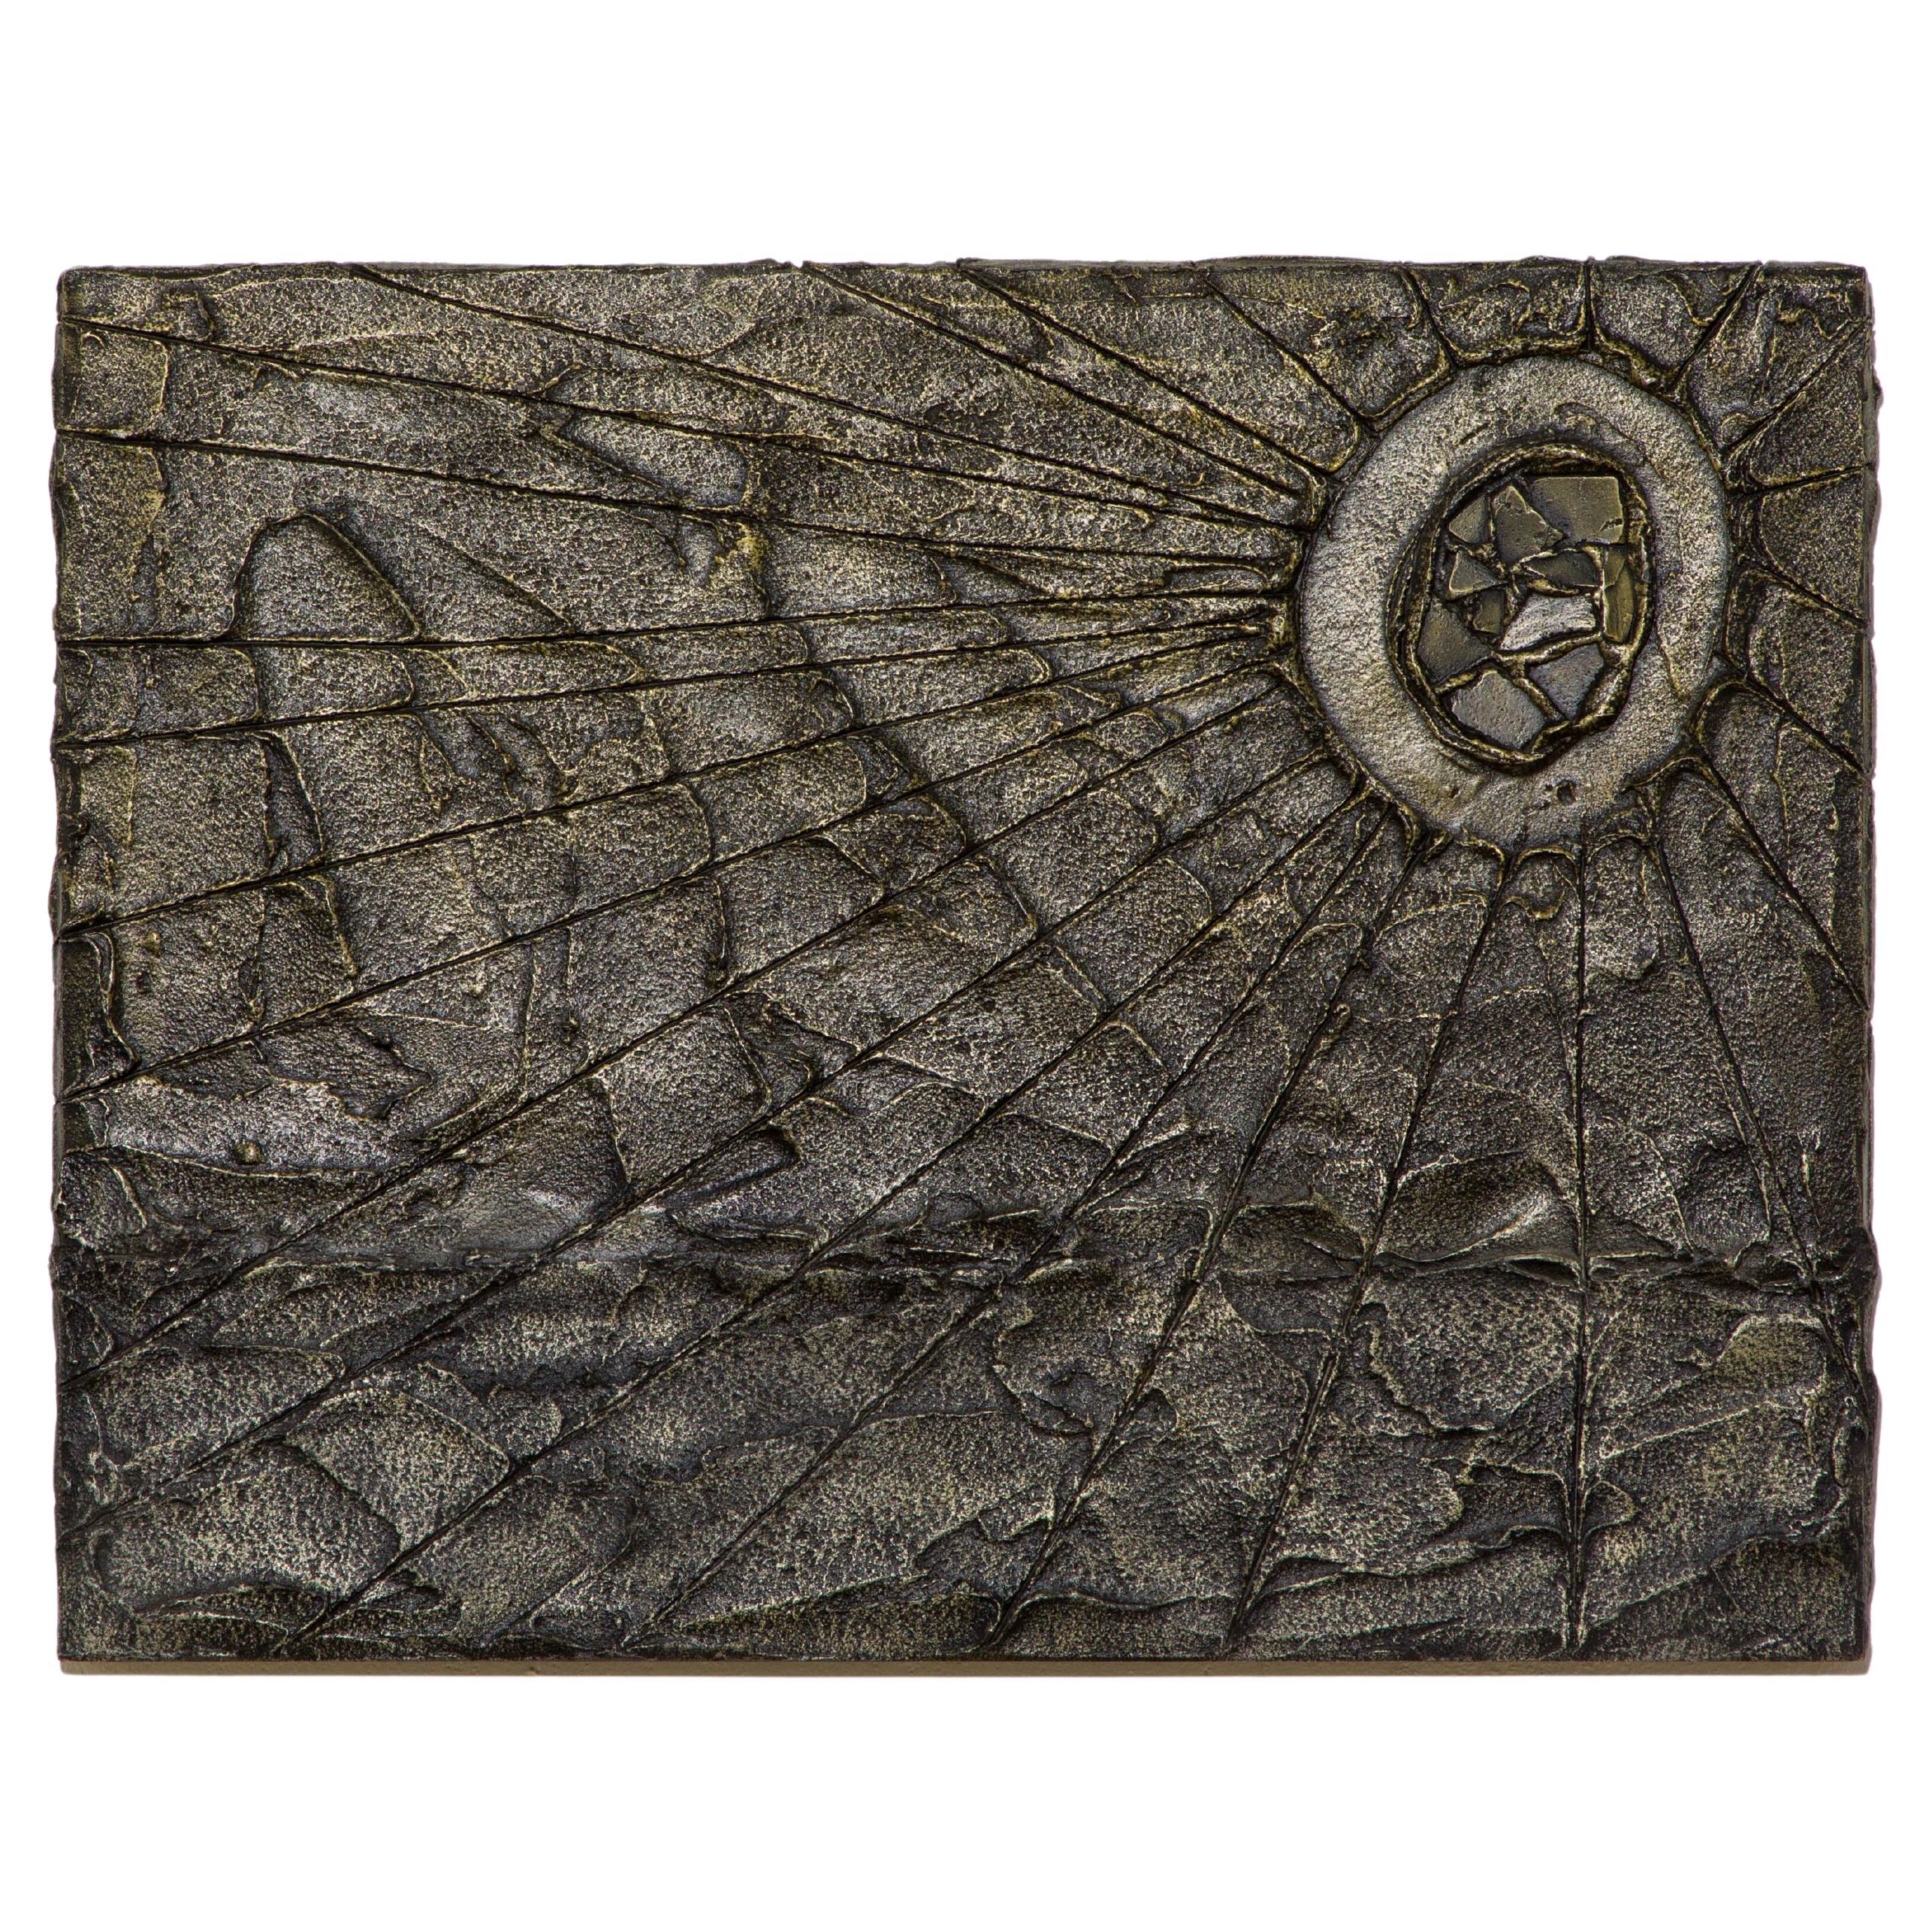 Brutalist Bronzed Resin Wall Relief Sculpture, Style of Paul Evans, c 1970s